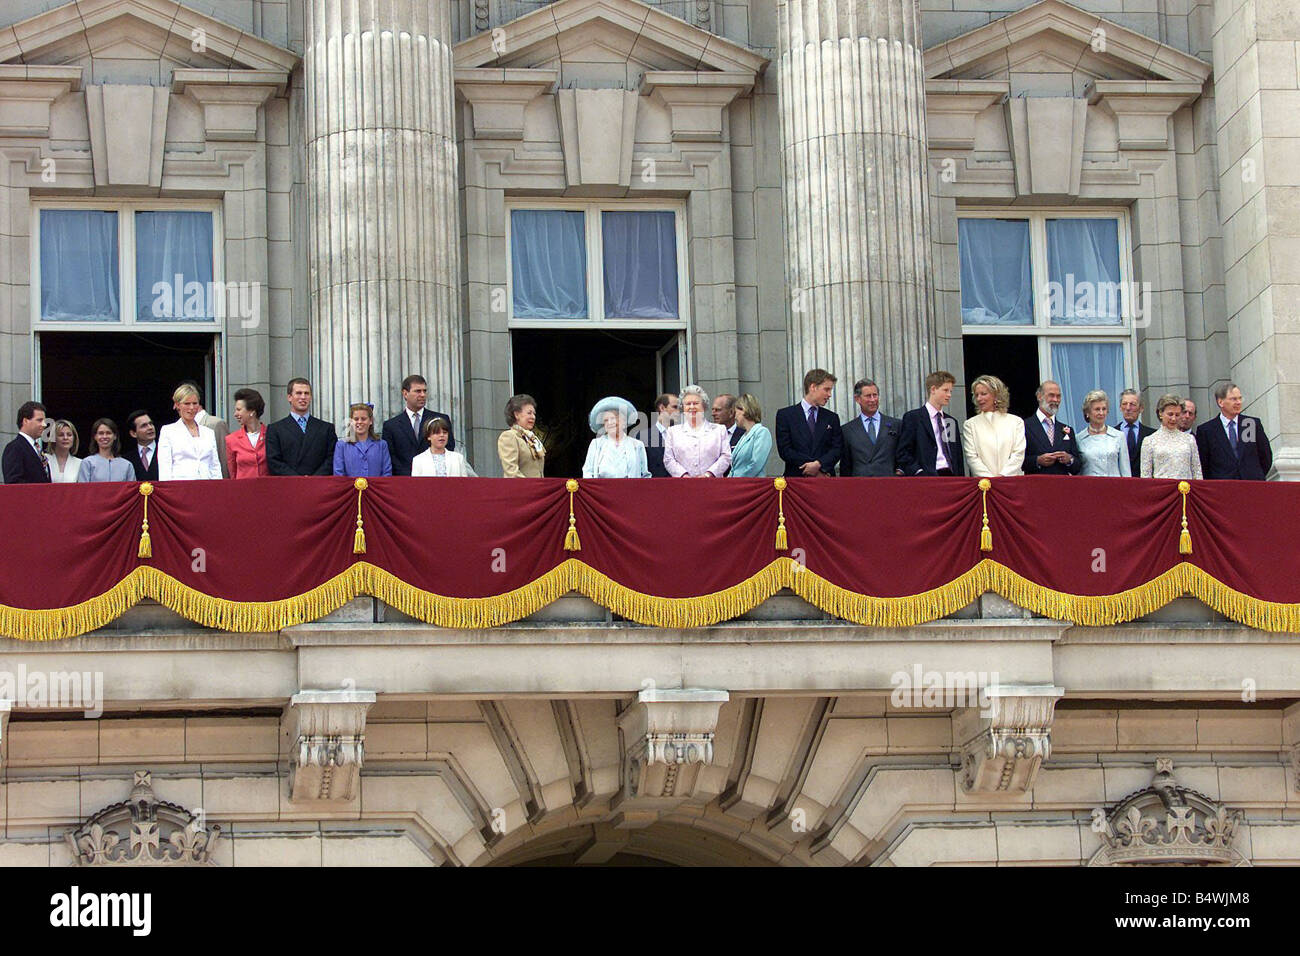 Queen Mother 100th Birthday August 2000 The Queen mother on the balcony of Buckingham Palce with members of her family left to right Viscount Linley his wife Serena Lady Sarah Chatto her husband Daniel Zara Phillips Tim Laurence Princess Royal Peter Phillips Princess Beatrice the Duke of York Princess Eugenie Pincess Maragaret The Queen Mother Queen Elizabeth ll Earl of Wessex partially hidden the Duke of Edinburgh the Countess of Wessex Prince William Prince Charles Prince Harry Princess Michael of Kent Prince Michael of Kent the Duchess of Kent hidden Duke of Kent rear Princess Alexandra Stock Photo